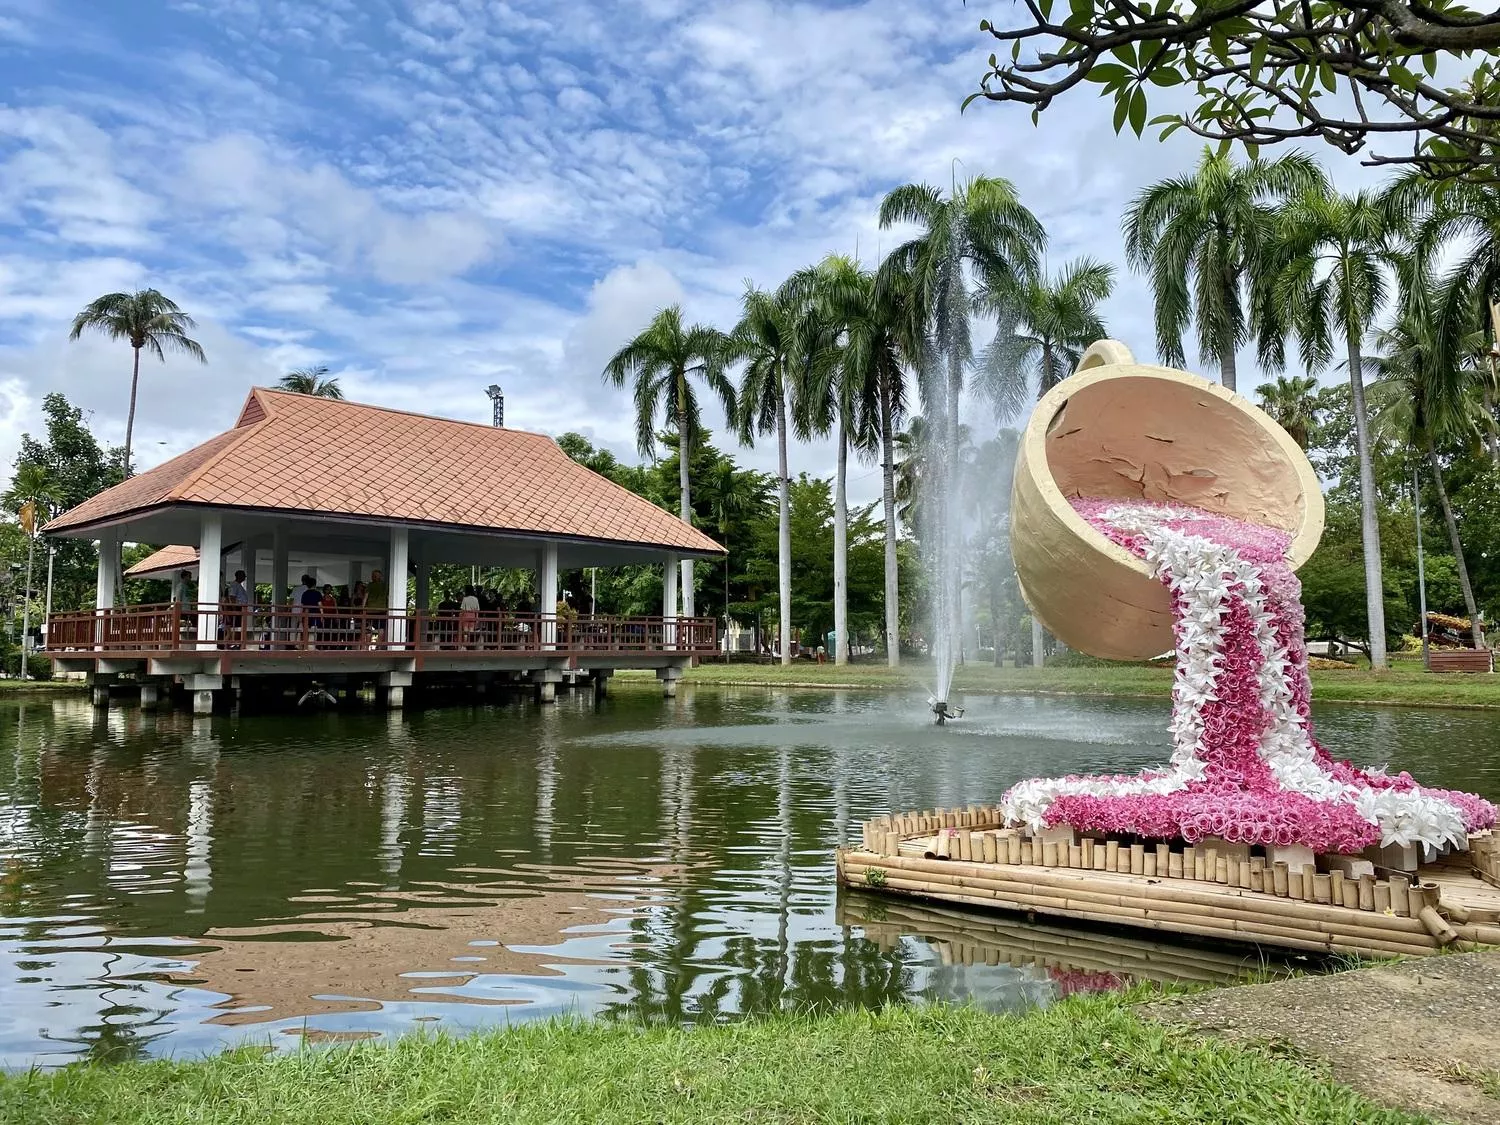 View on a pavilion in a pond, a fountain and a tea cup as art decoration